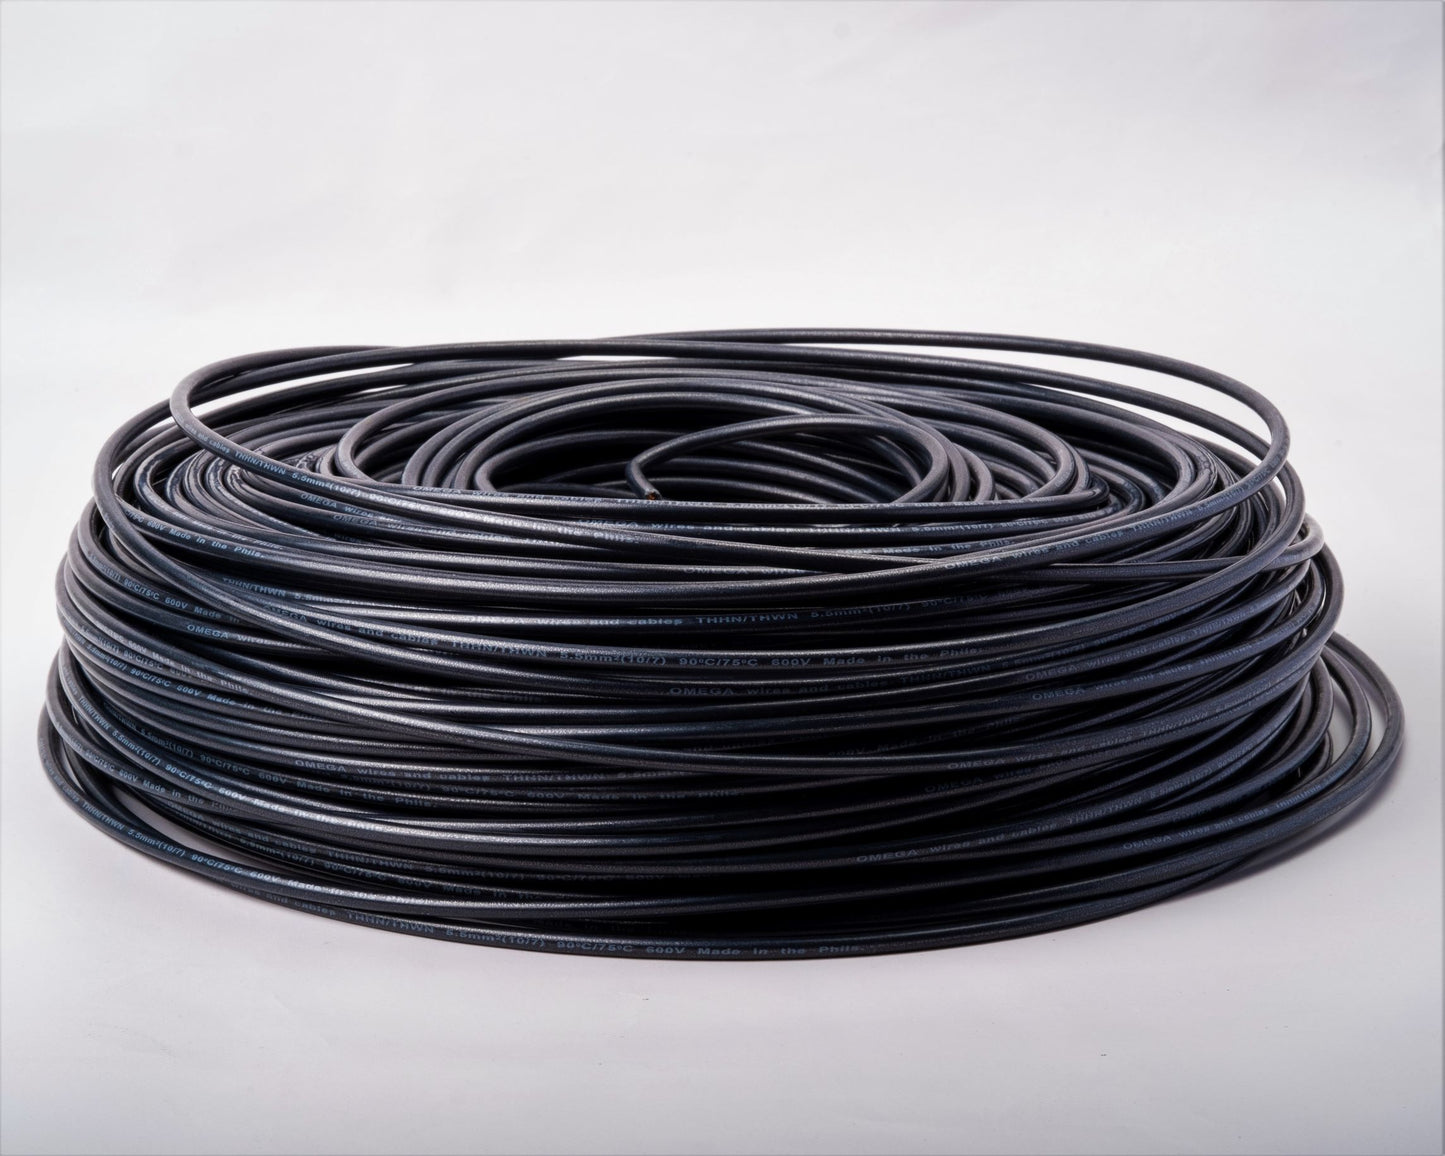 OMEGA THHN WIRES 10/7 (5.5mm²)